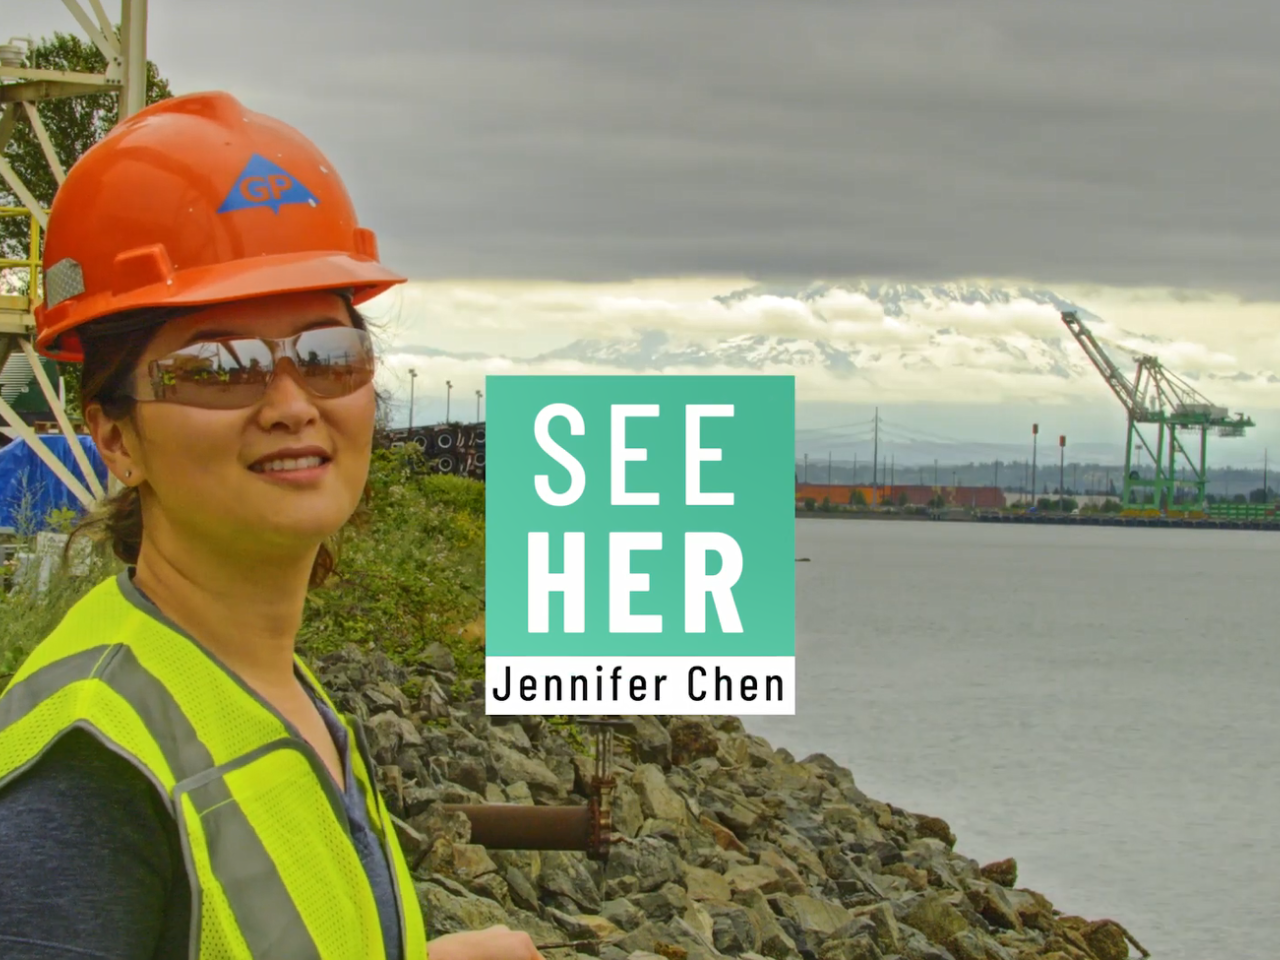 Jennifer Chen outside with a waterway and industrial machinery behind her. "SeeHer Jennifer Chen".